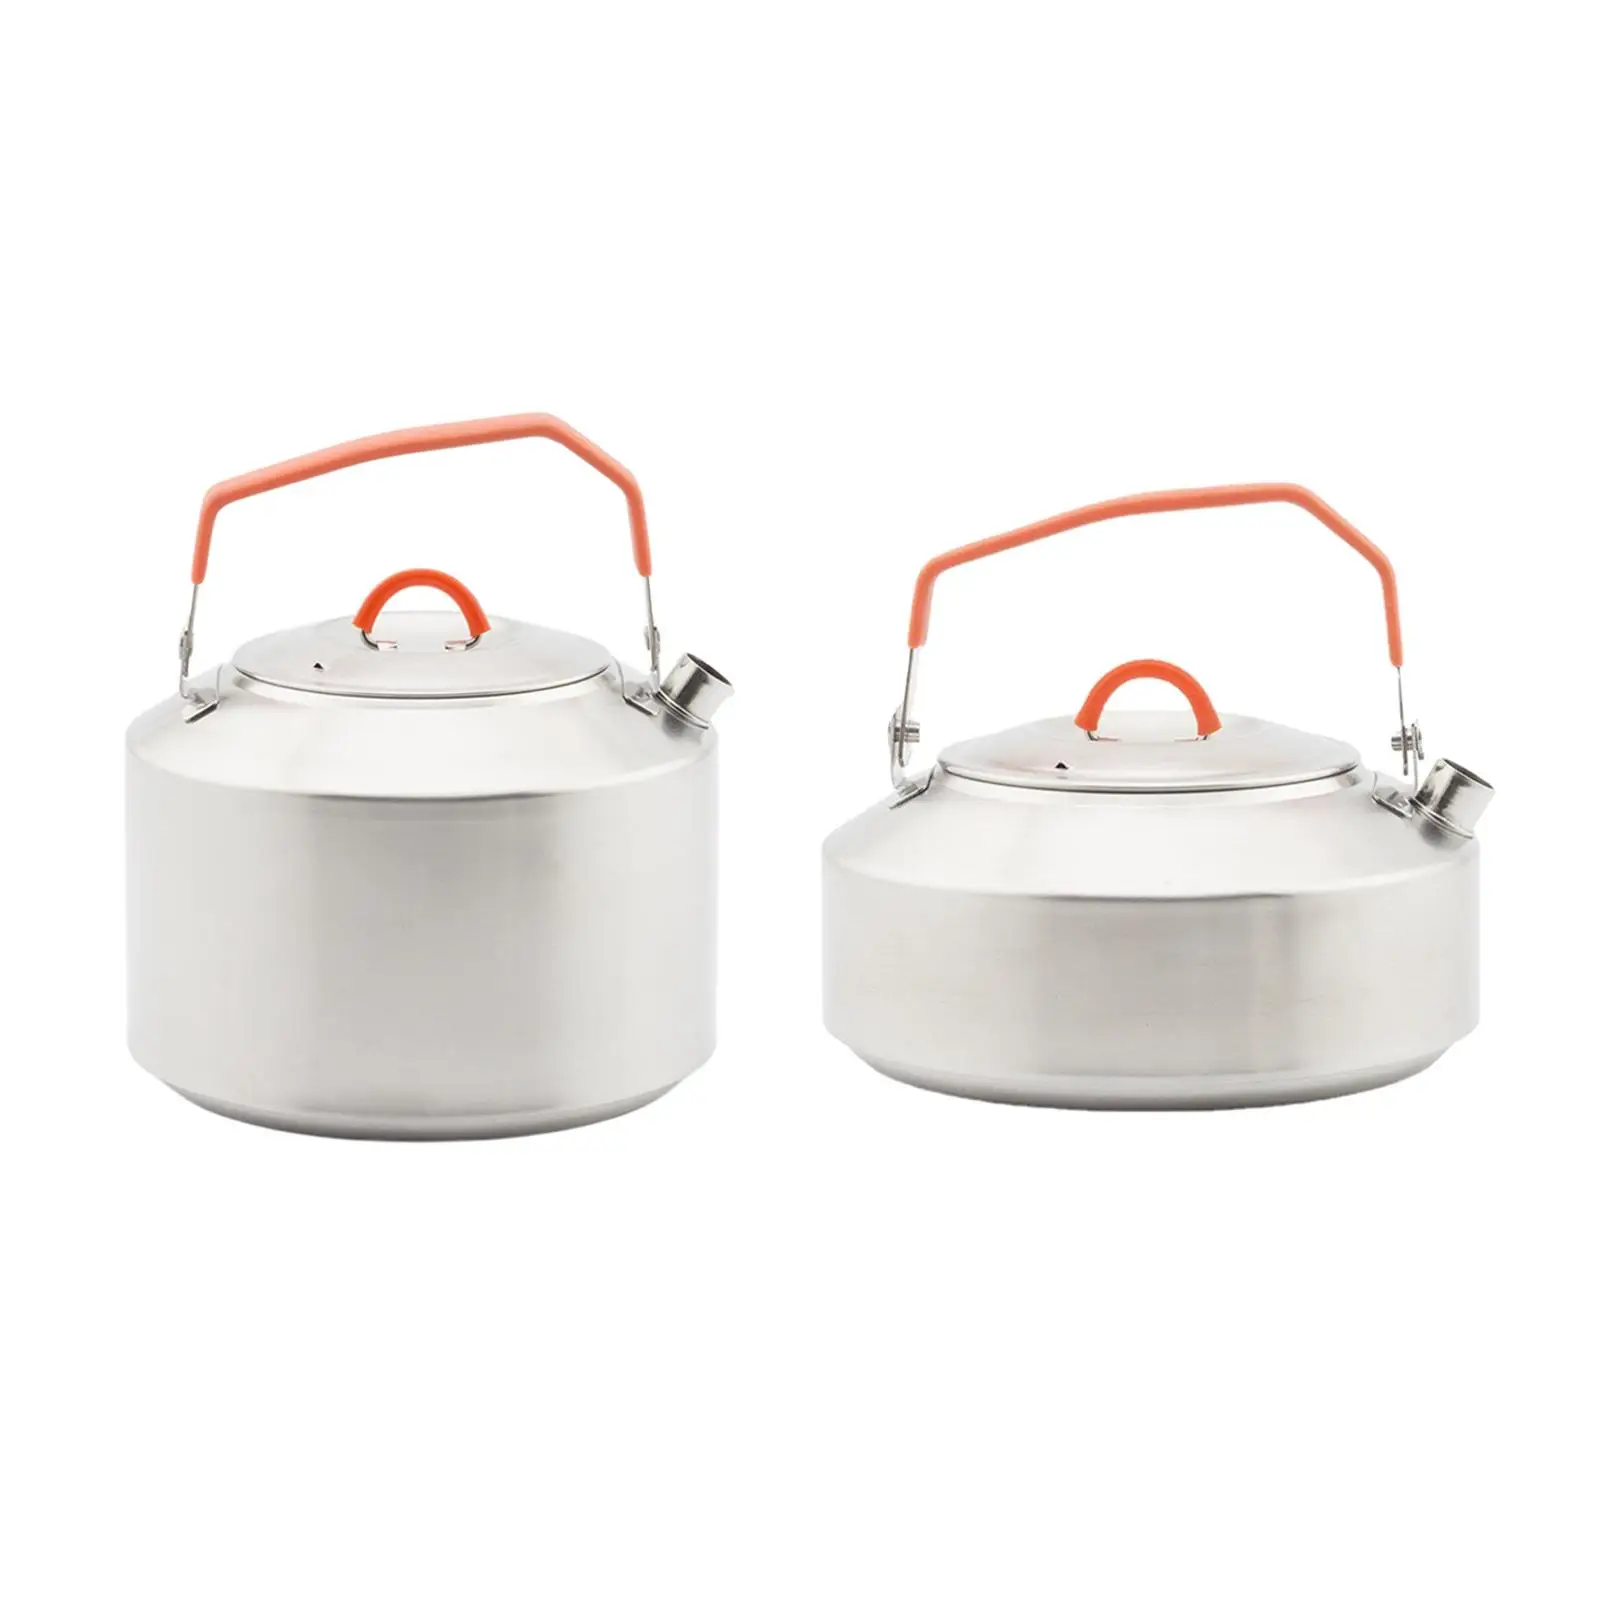 Stainless Steel Camping Kettle Camp Tea Pot Water Kettle for Backpacking